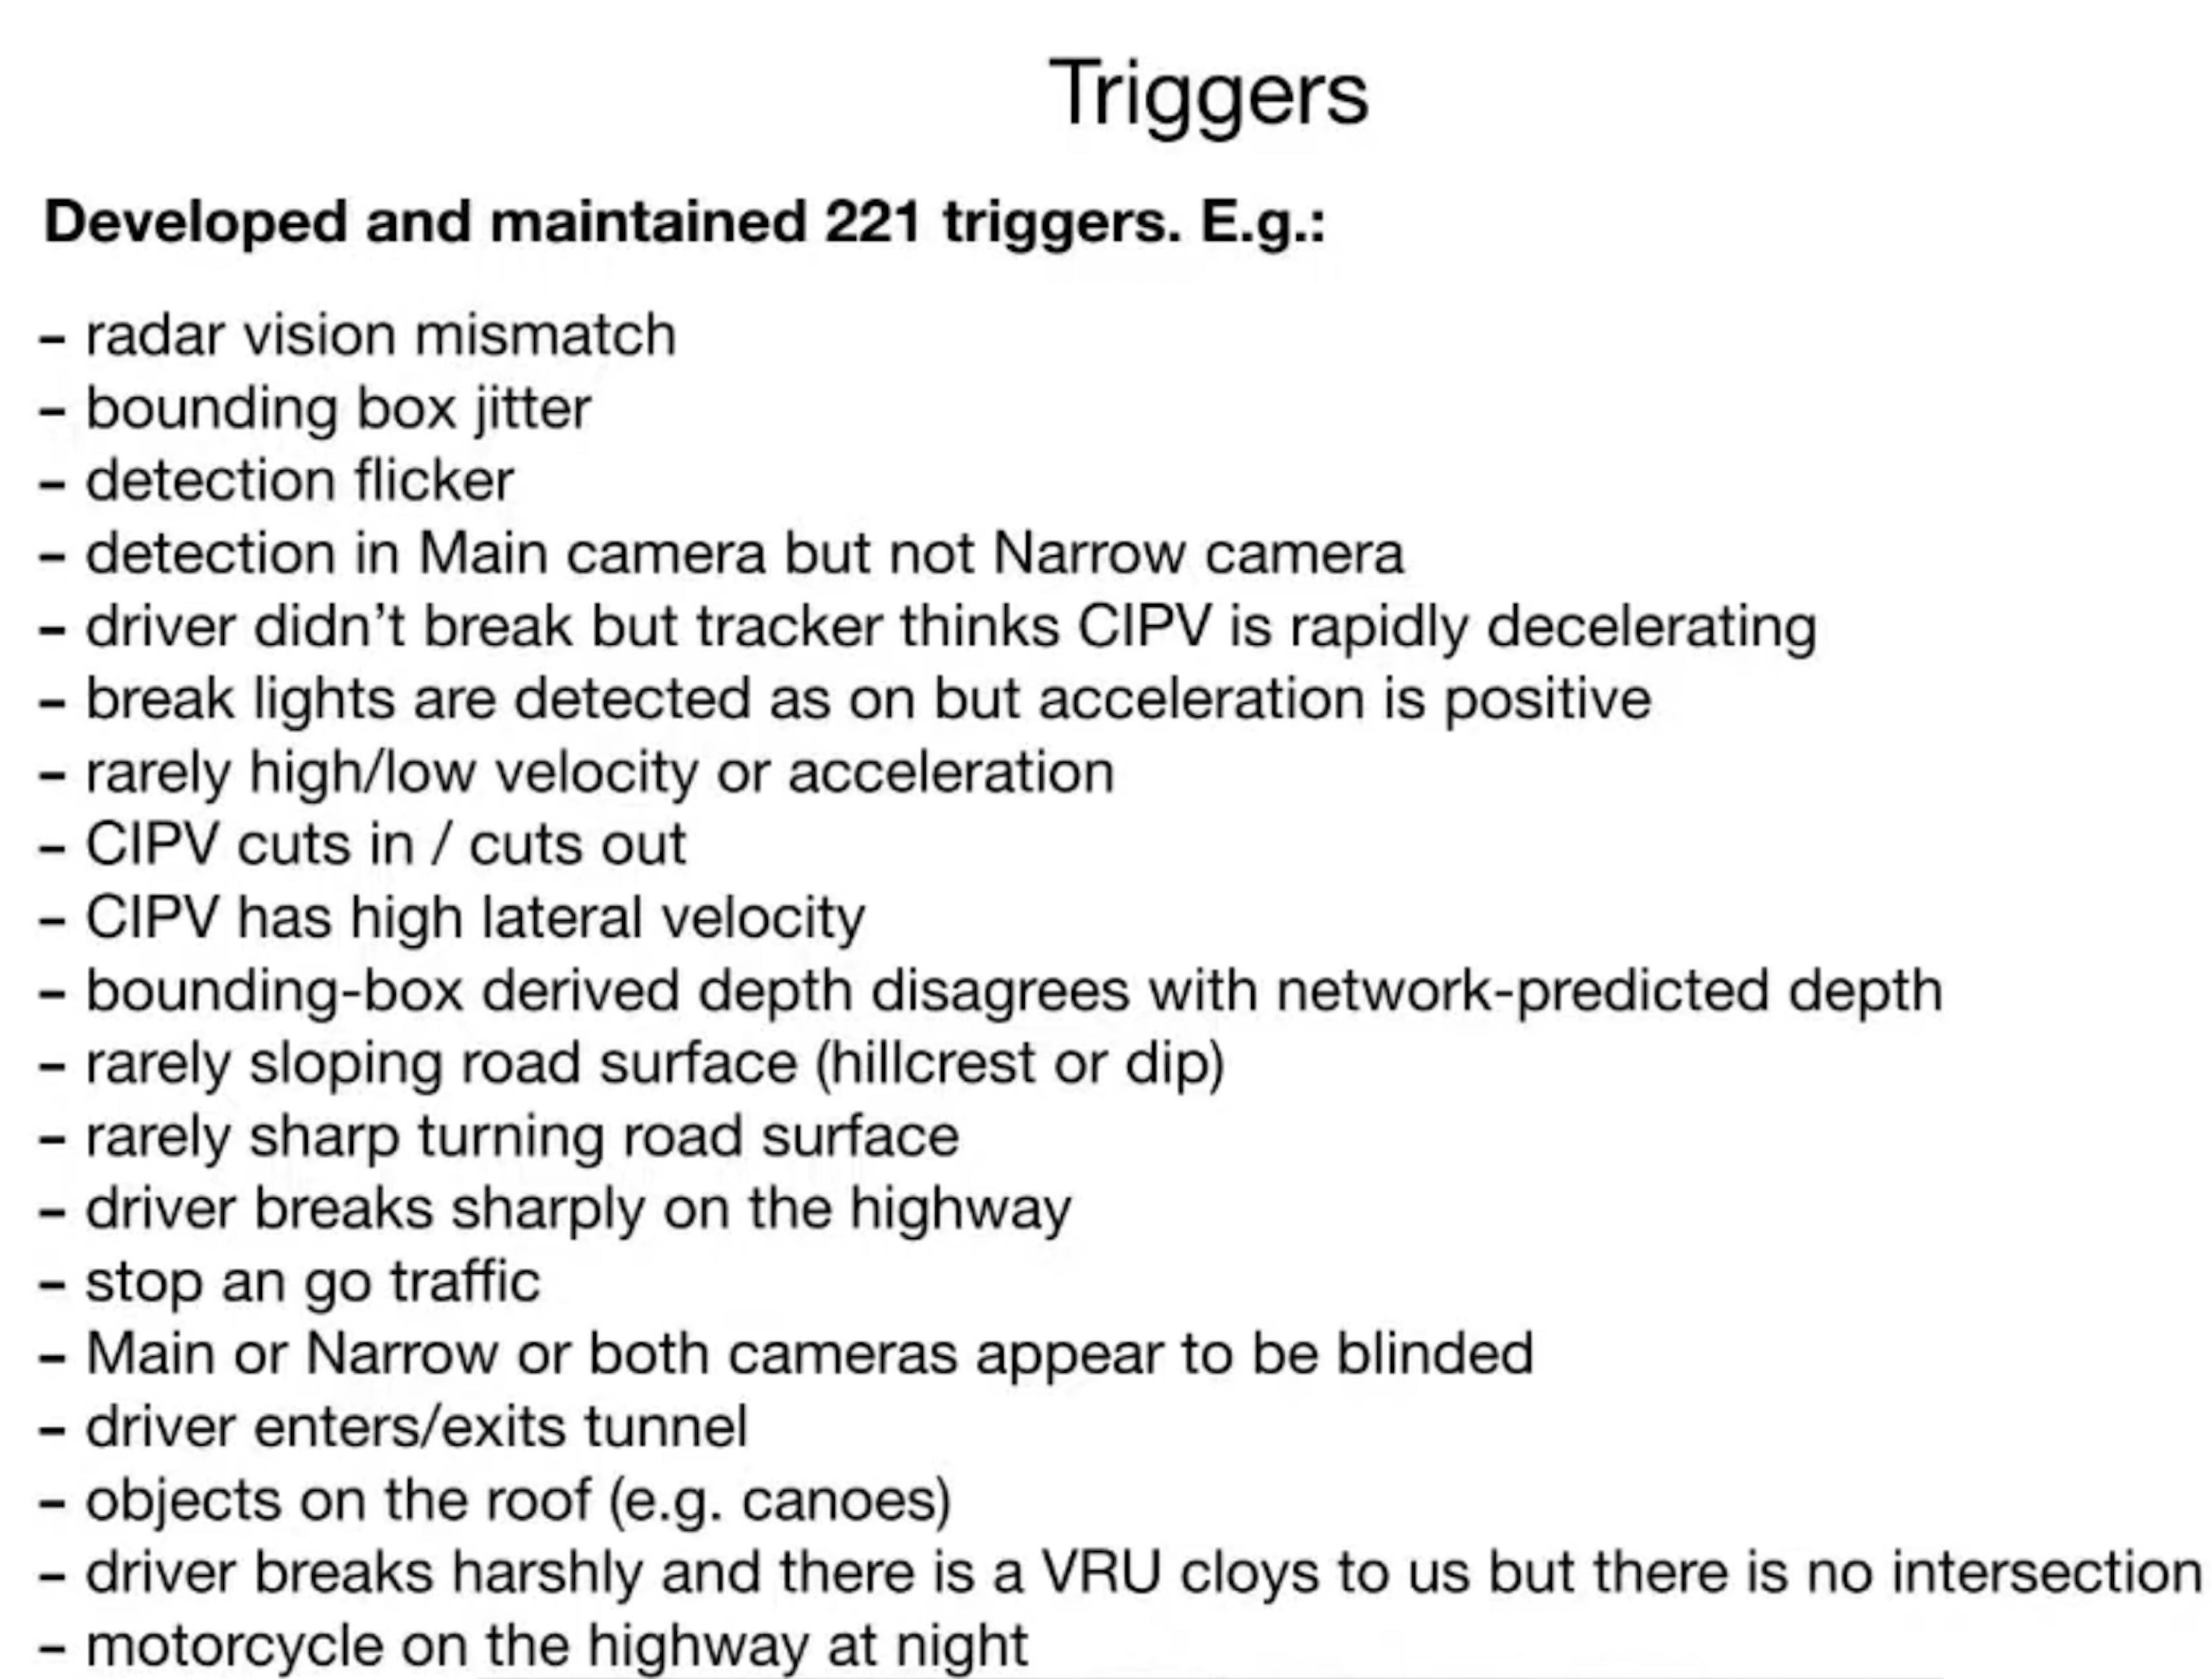 Examples of triggers used by the Tesla self-driving team to source data for labeling. Taken from Andrej Karpathy’s talk at CVPR 2021